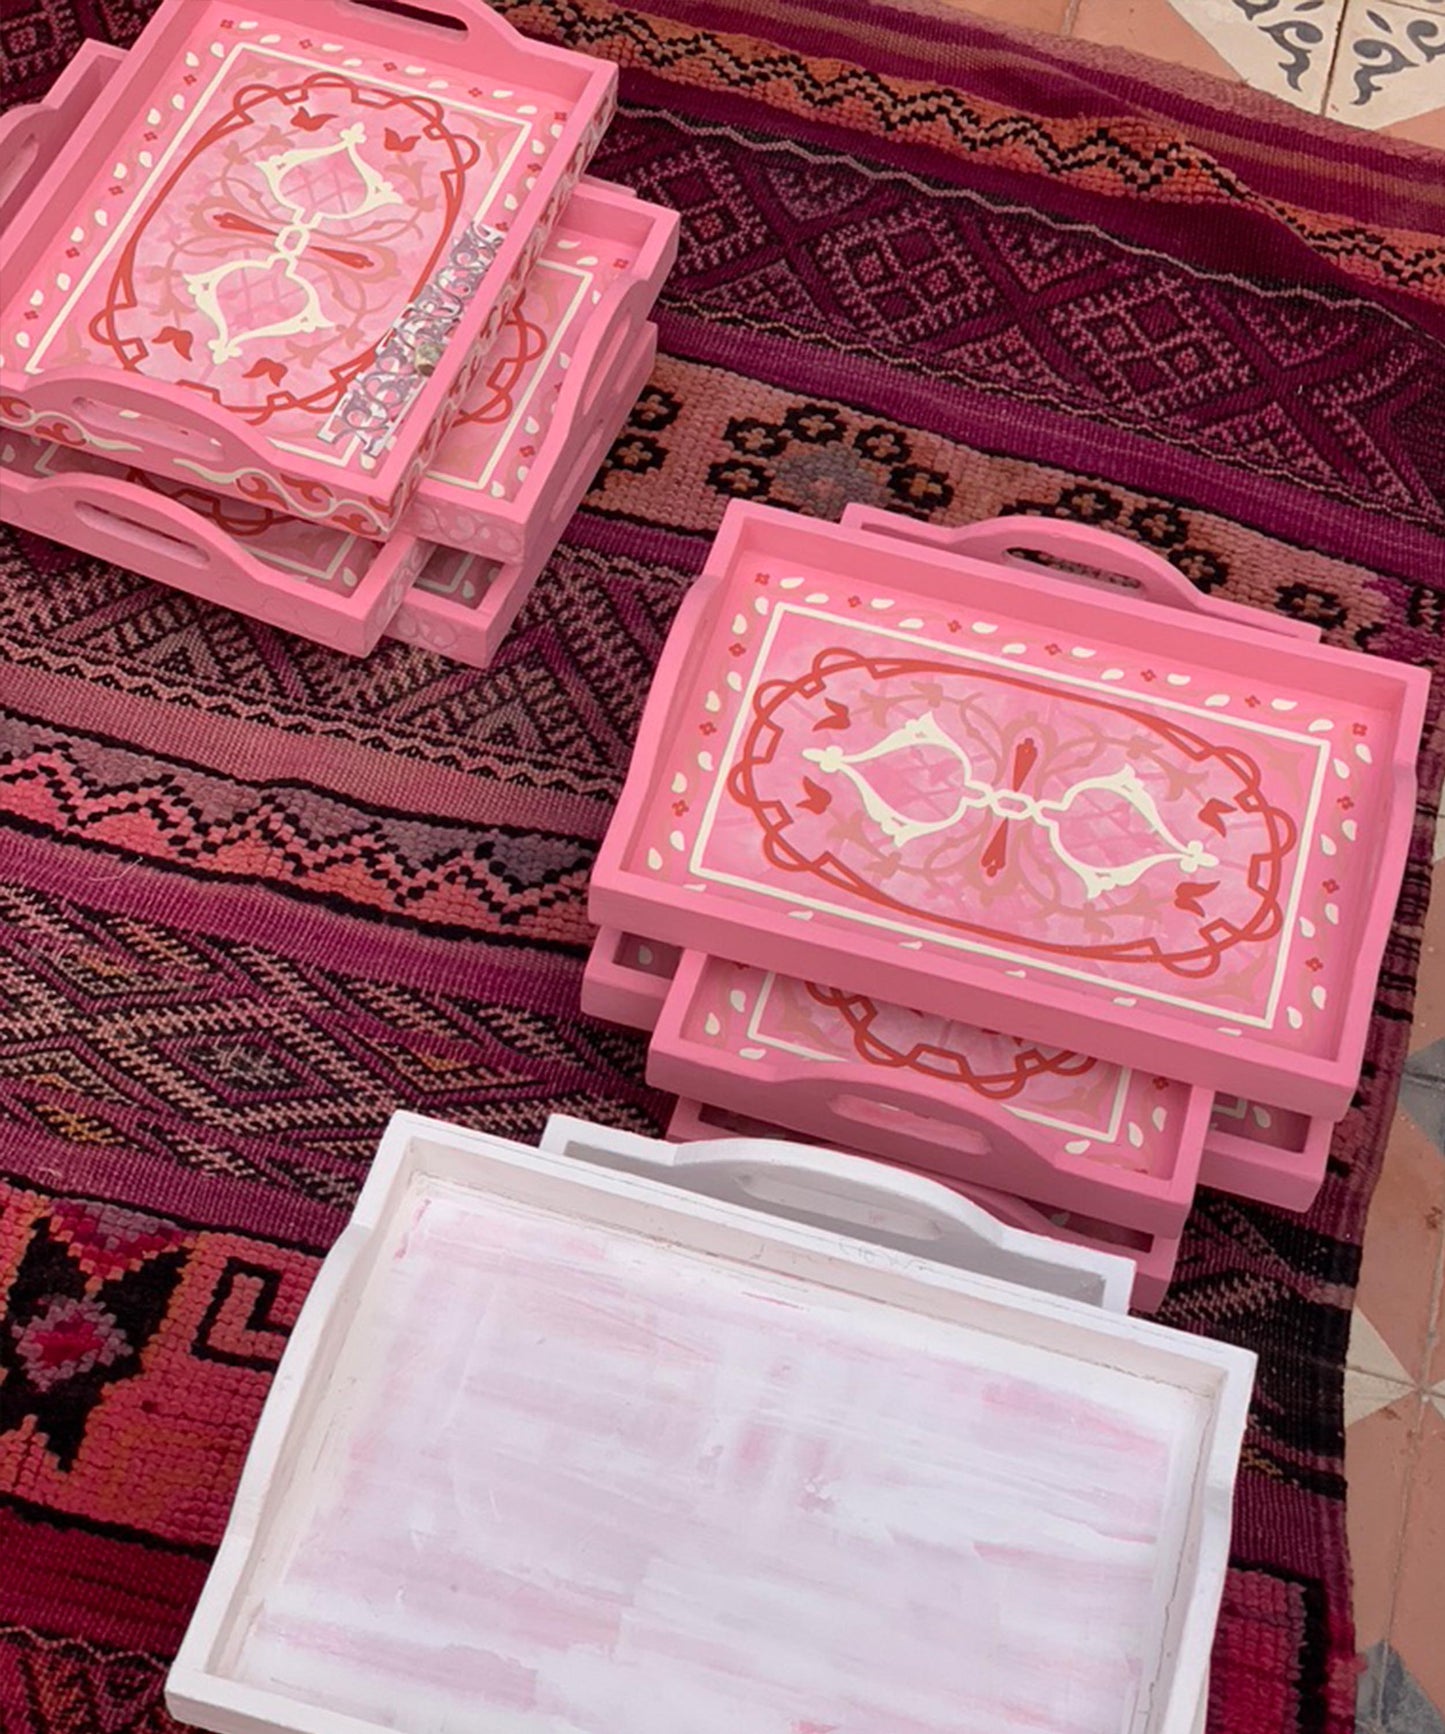 The Pink Majorelle Tray